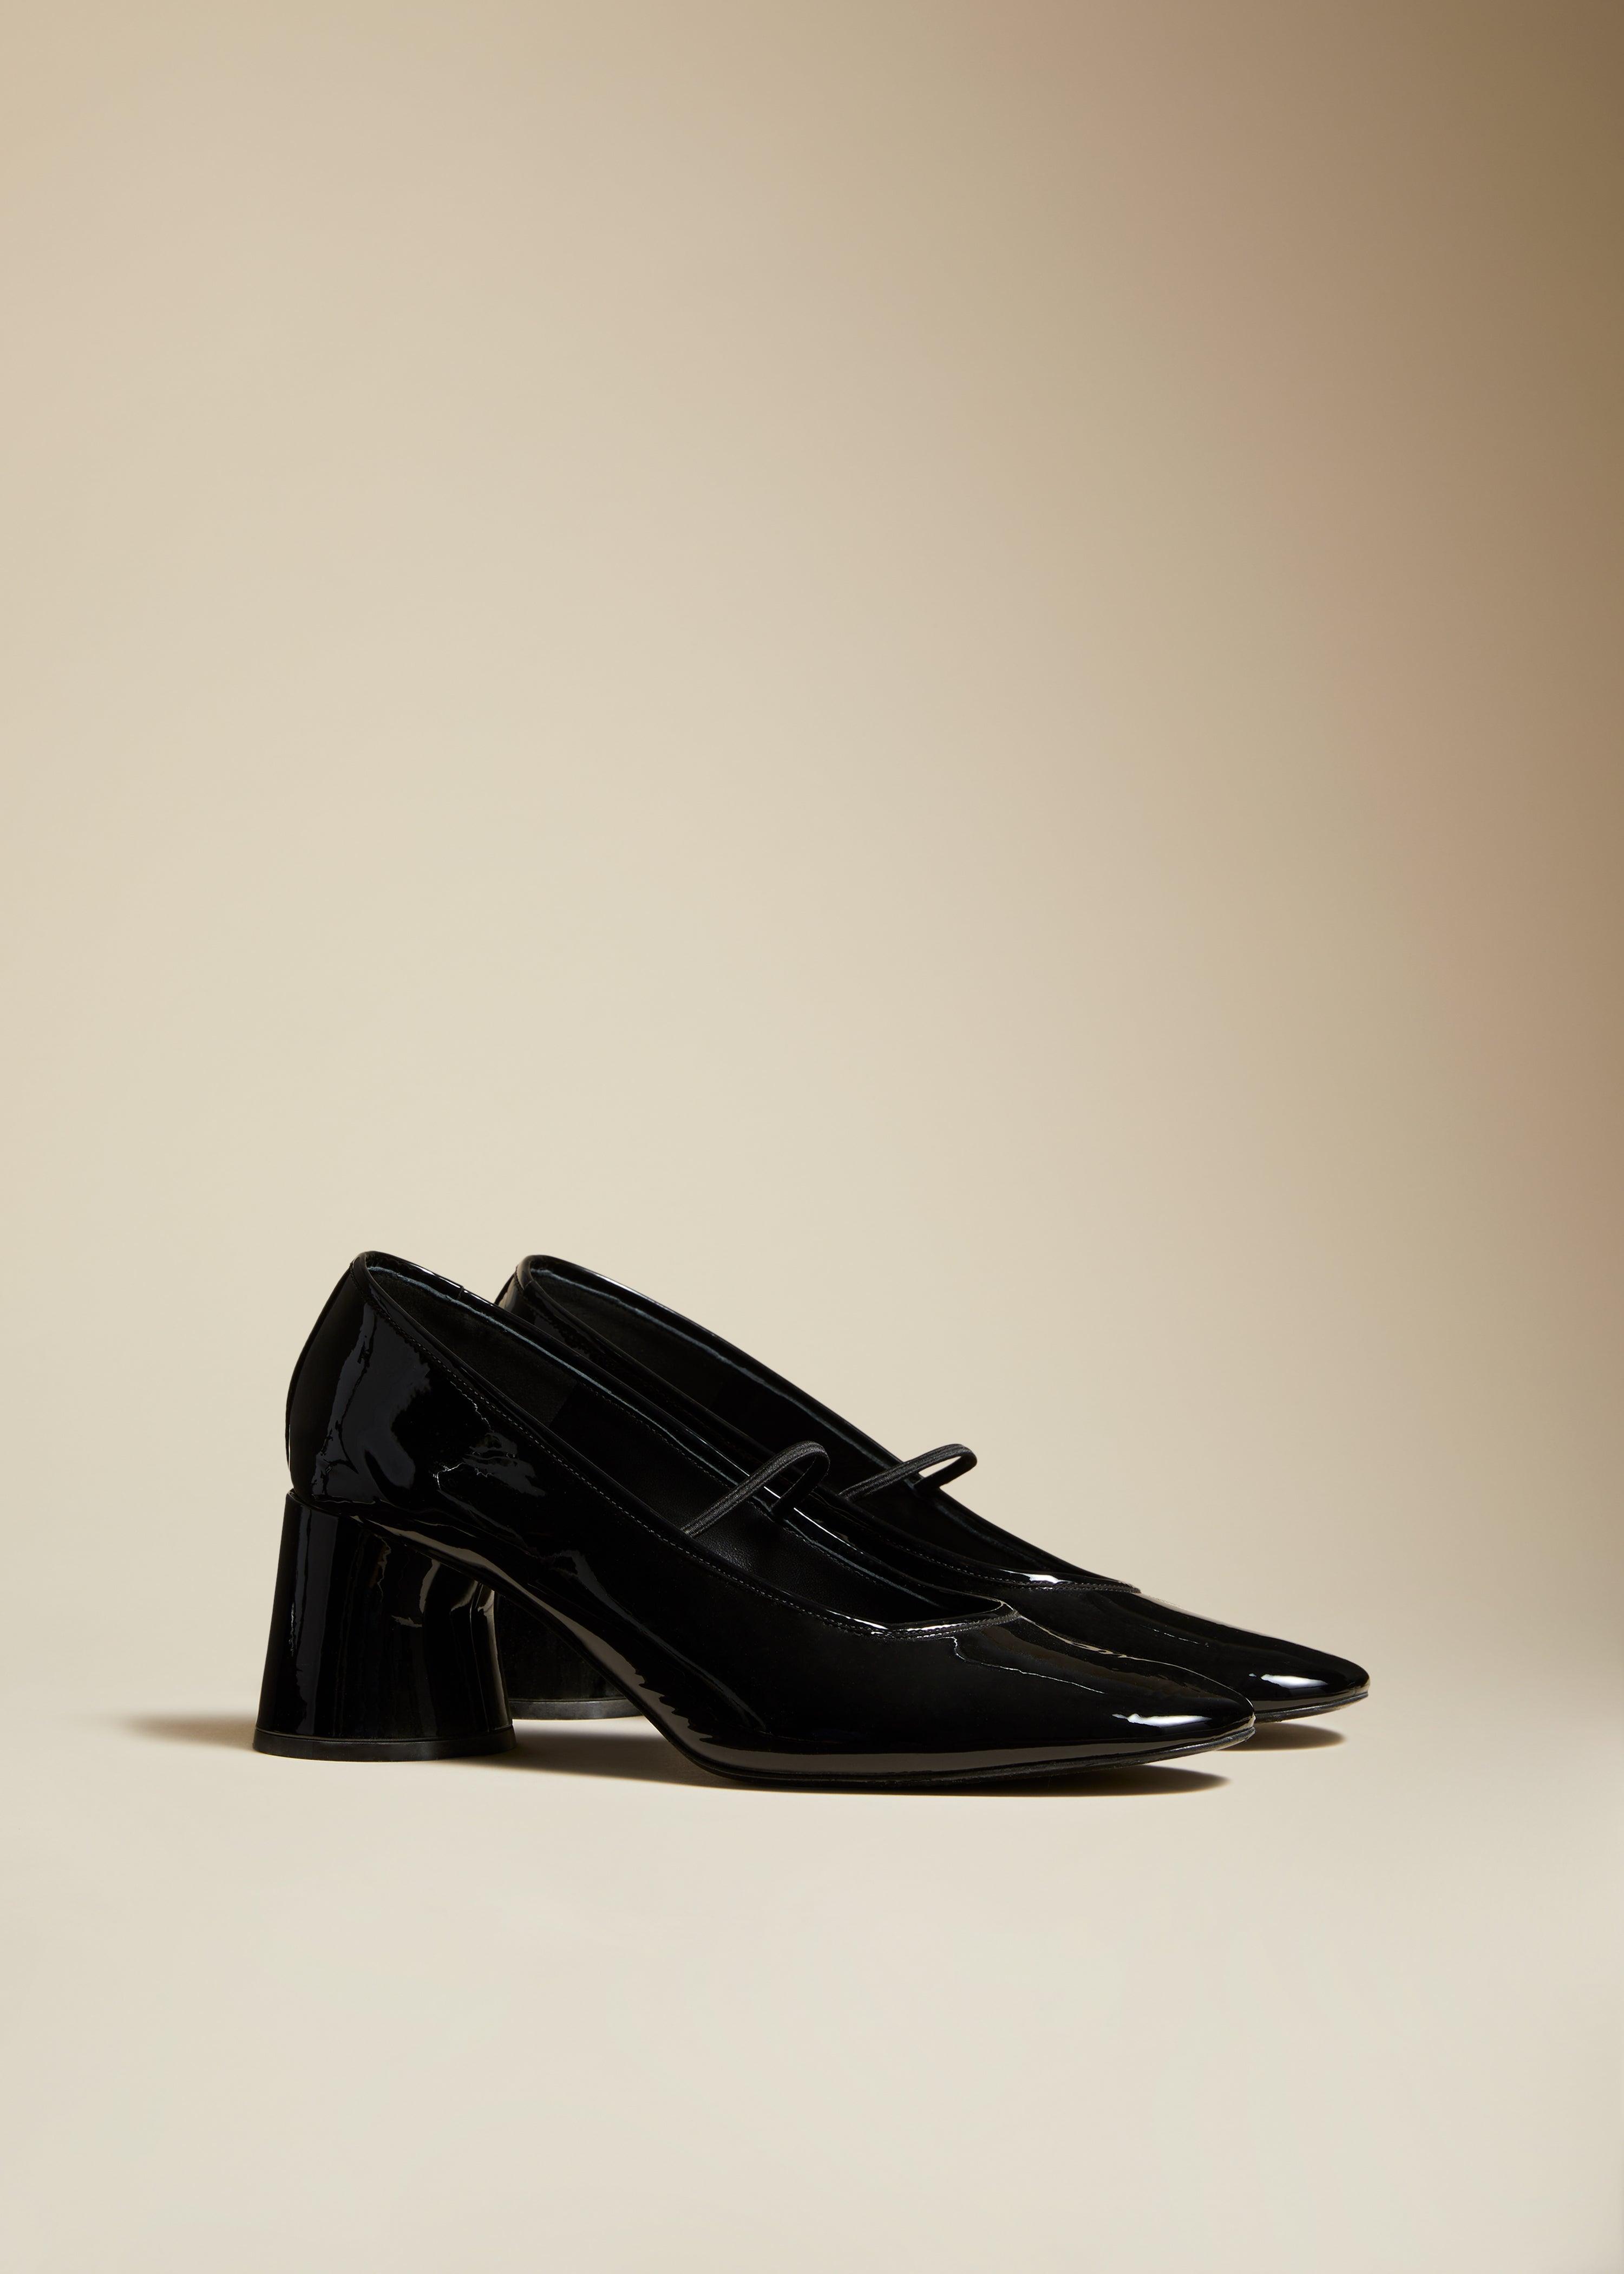 The Lorimer Pump in Black Patent Leather - The Iconic Issue